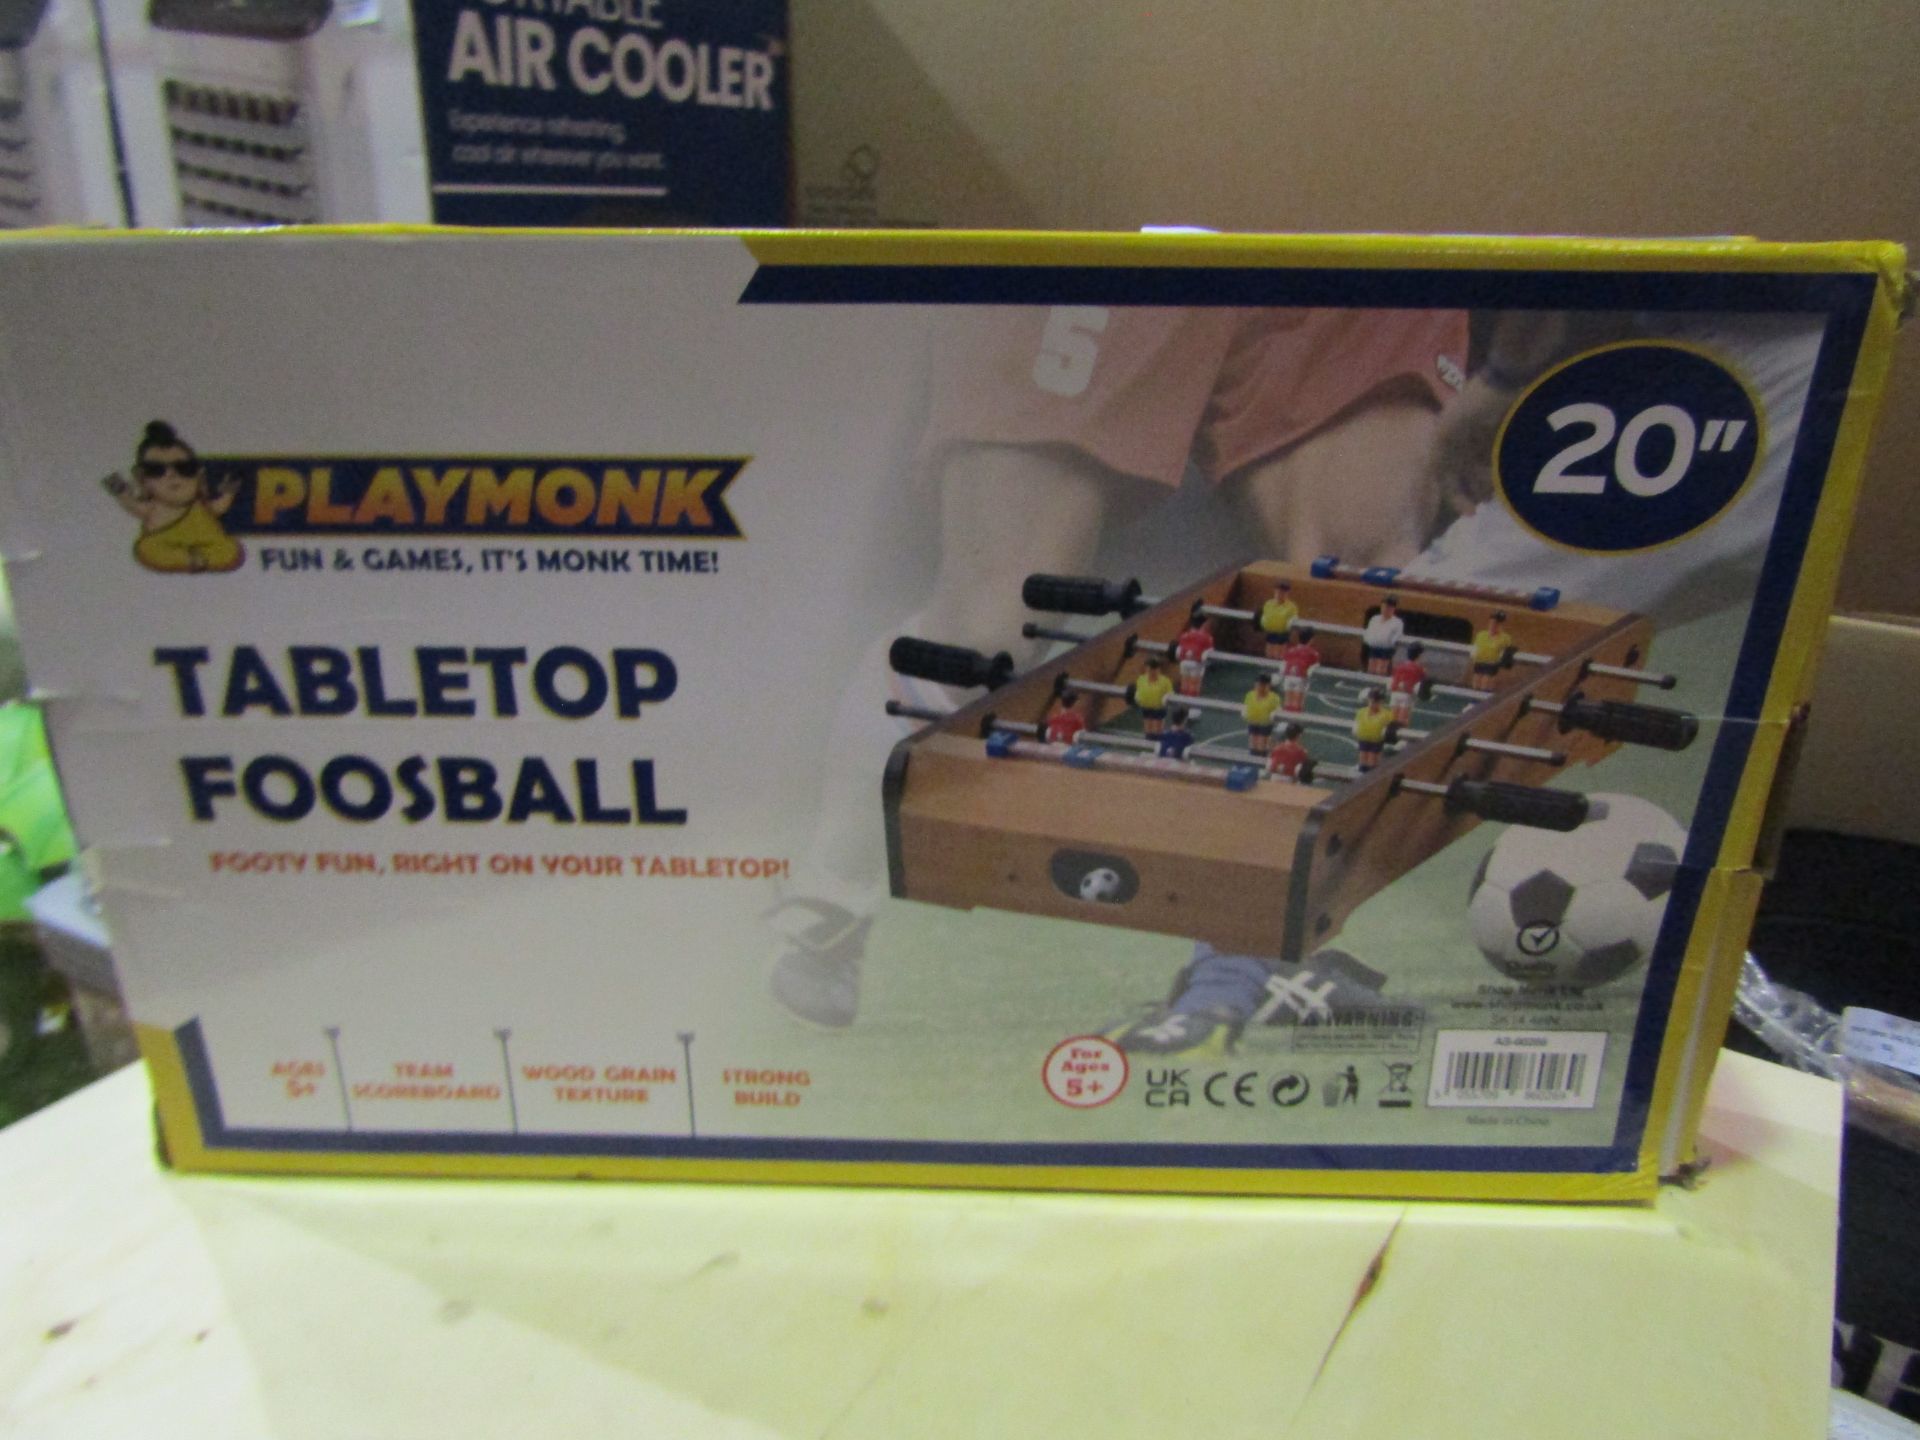 Playmonk 20" Tabletop Foosball - Unchecked & Boxed.